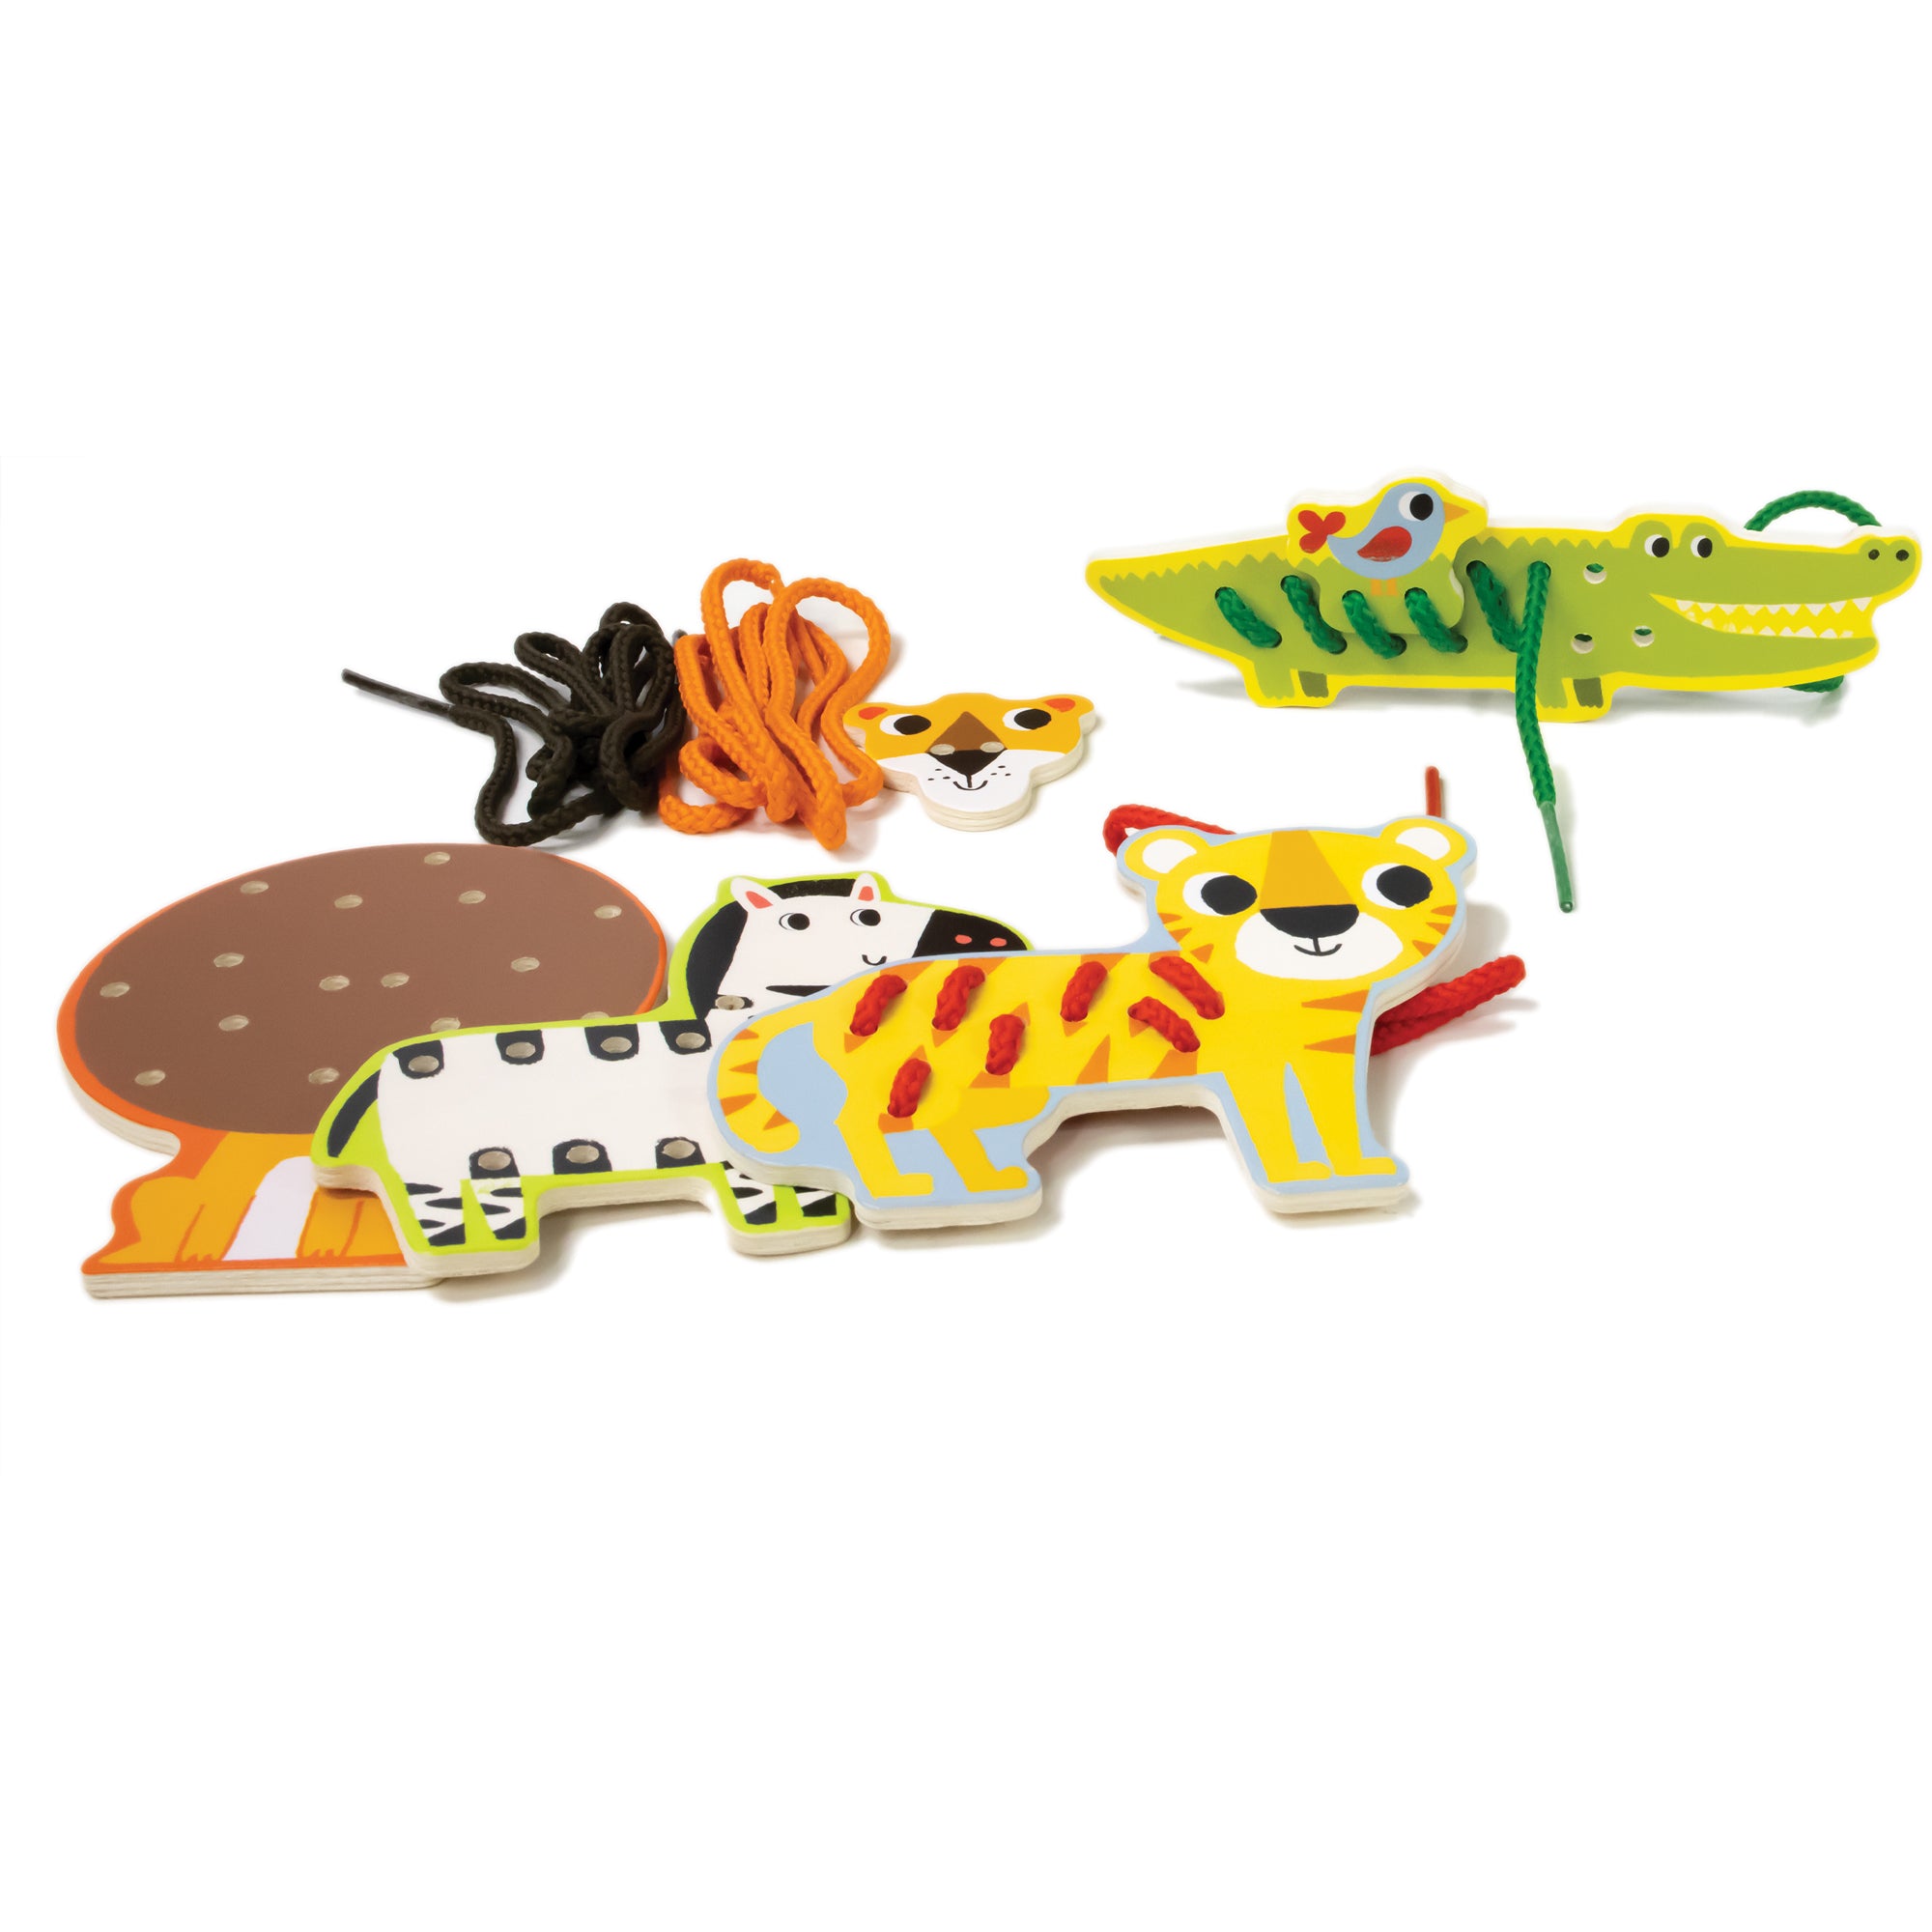 Djeco Wooden Lacing Zoo Animals contents laid out. On the bottom are the starting wood pieces for the lion, zebra, and tiger. The tiger is already laced with a red lace. Above are the black and orange laces with the face for the lion. To the right is an alligator with a bird laced to its’ back with green lacing.